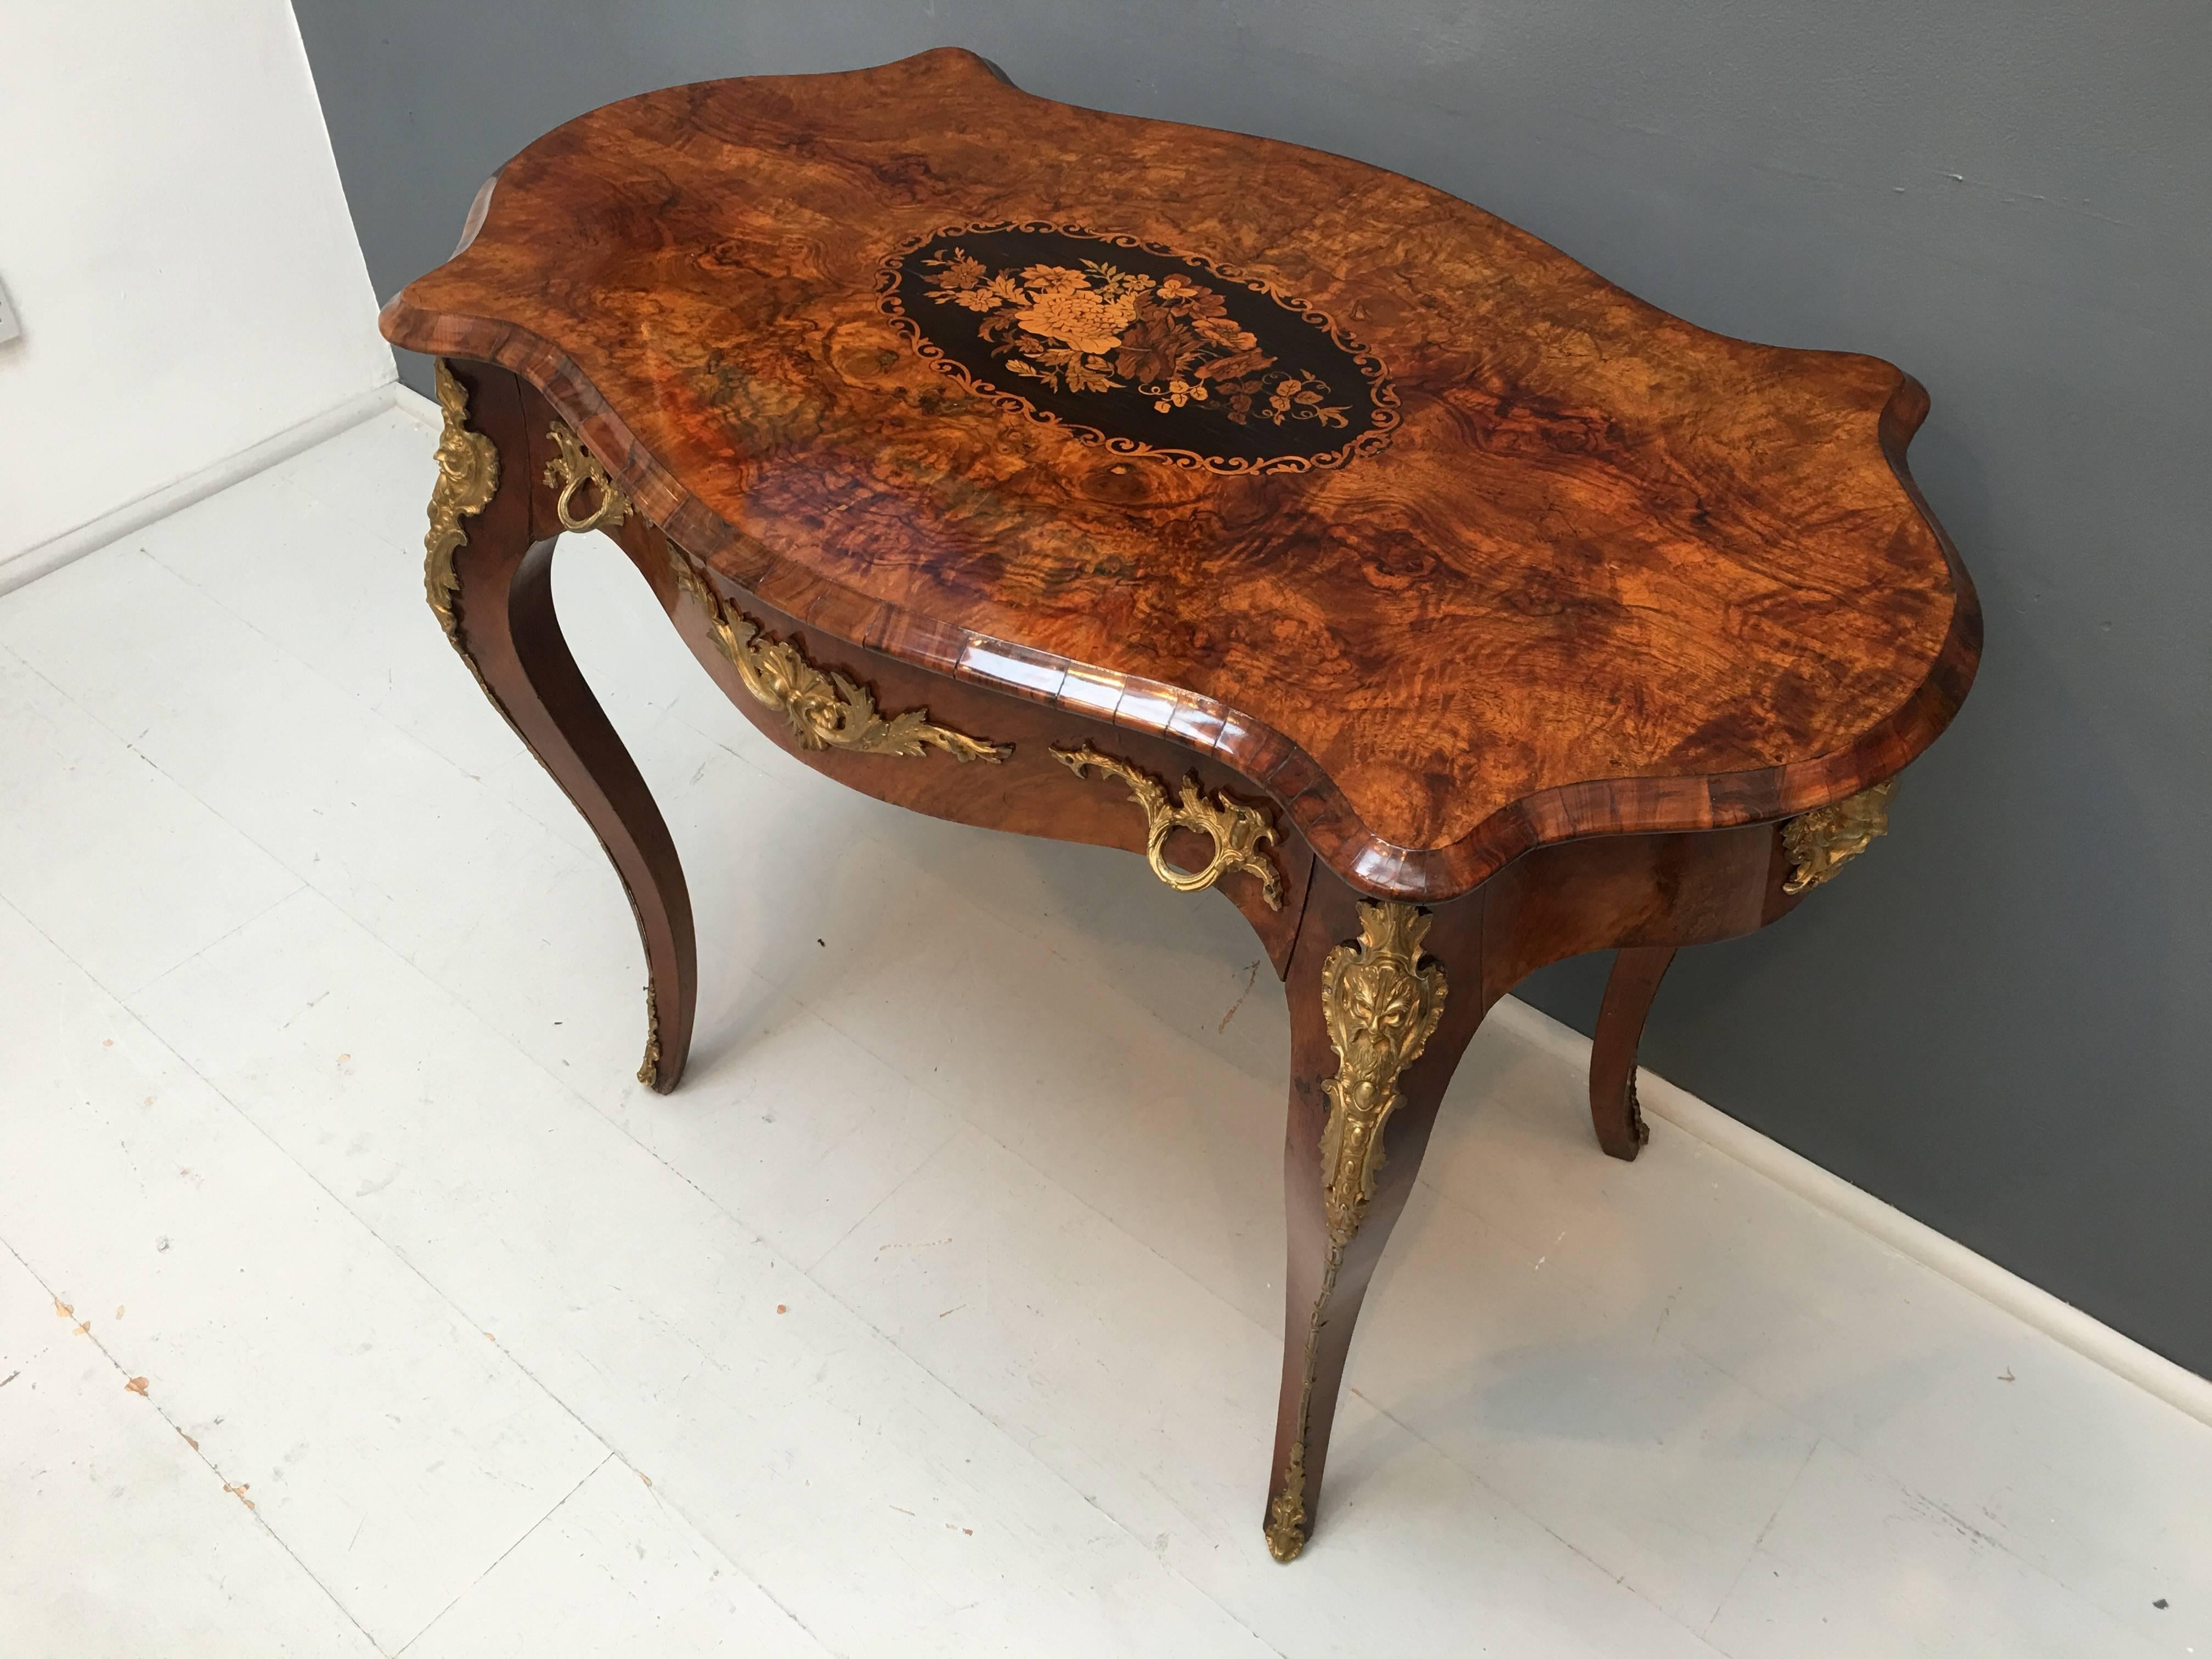 A superb 19th century serpentine shaped Napoleon III, circa 1870 burr walnut with ebony and satinwood marquetry inlaid writing or centre table

Cabriole legs and gilt mounted and in beautiful condition.
 